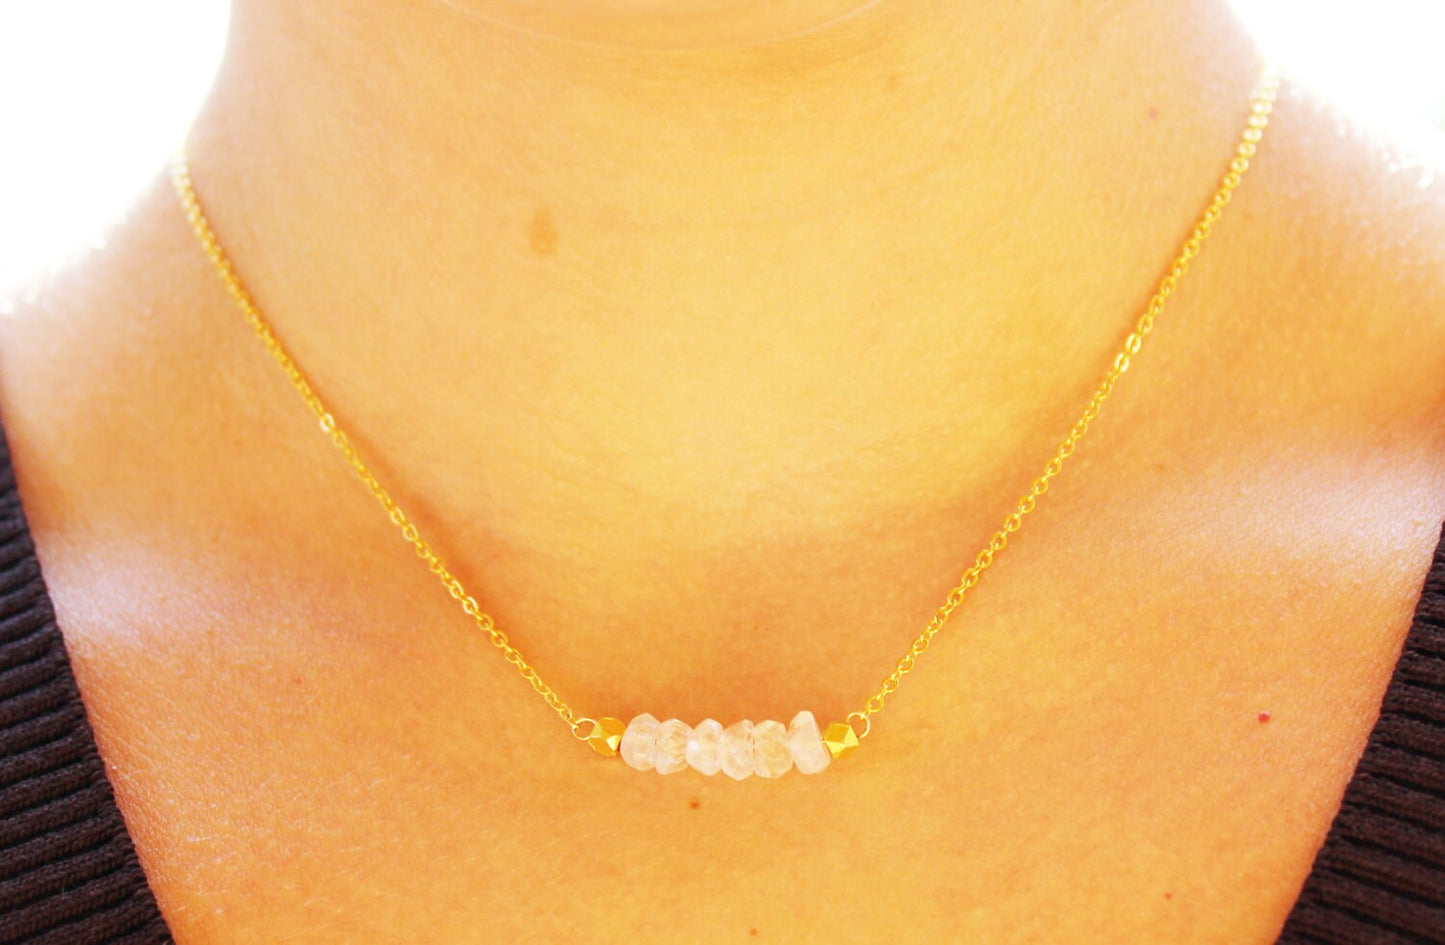 Rose Quartz and Gold Necklace - Minimalist Jewelry - Pink and Gold Necklace